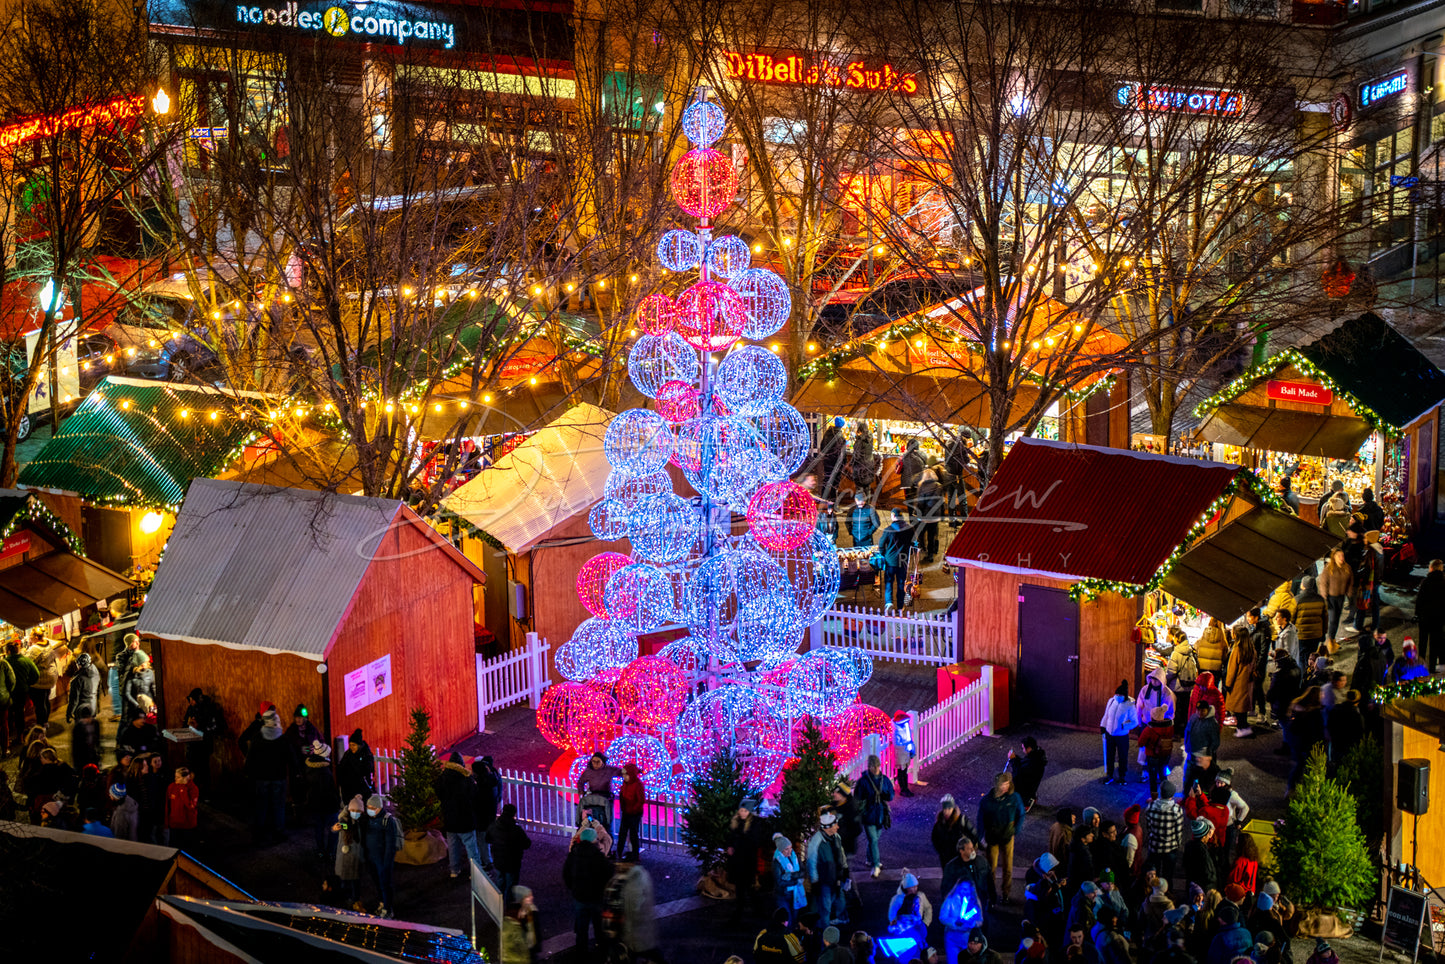 The Christmas Tree at Market Square